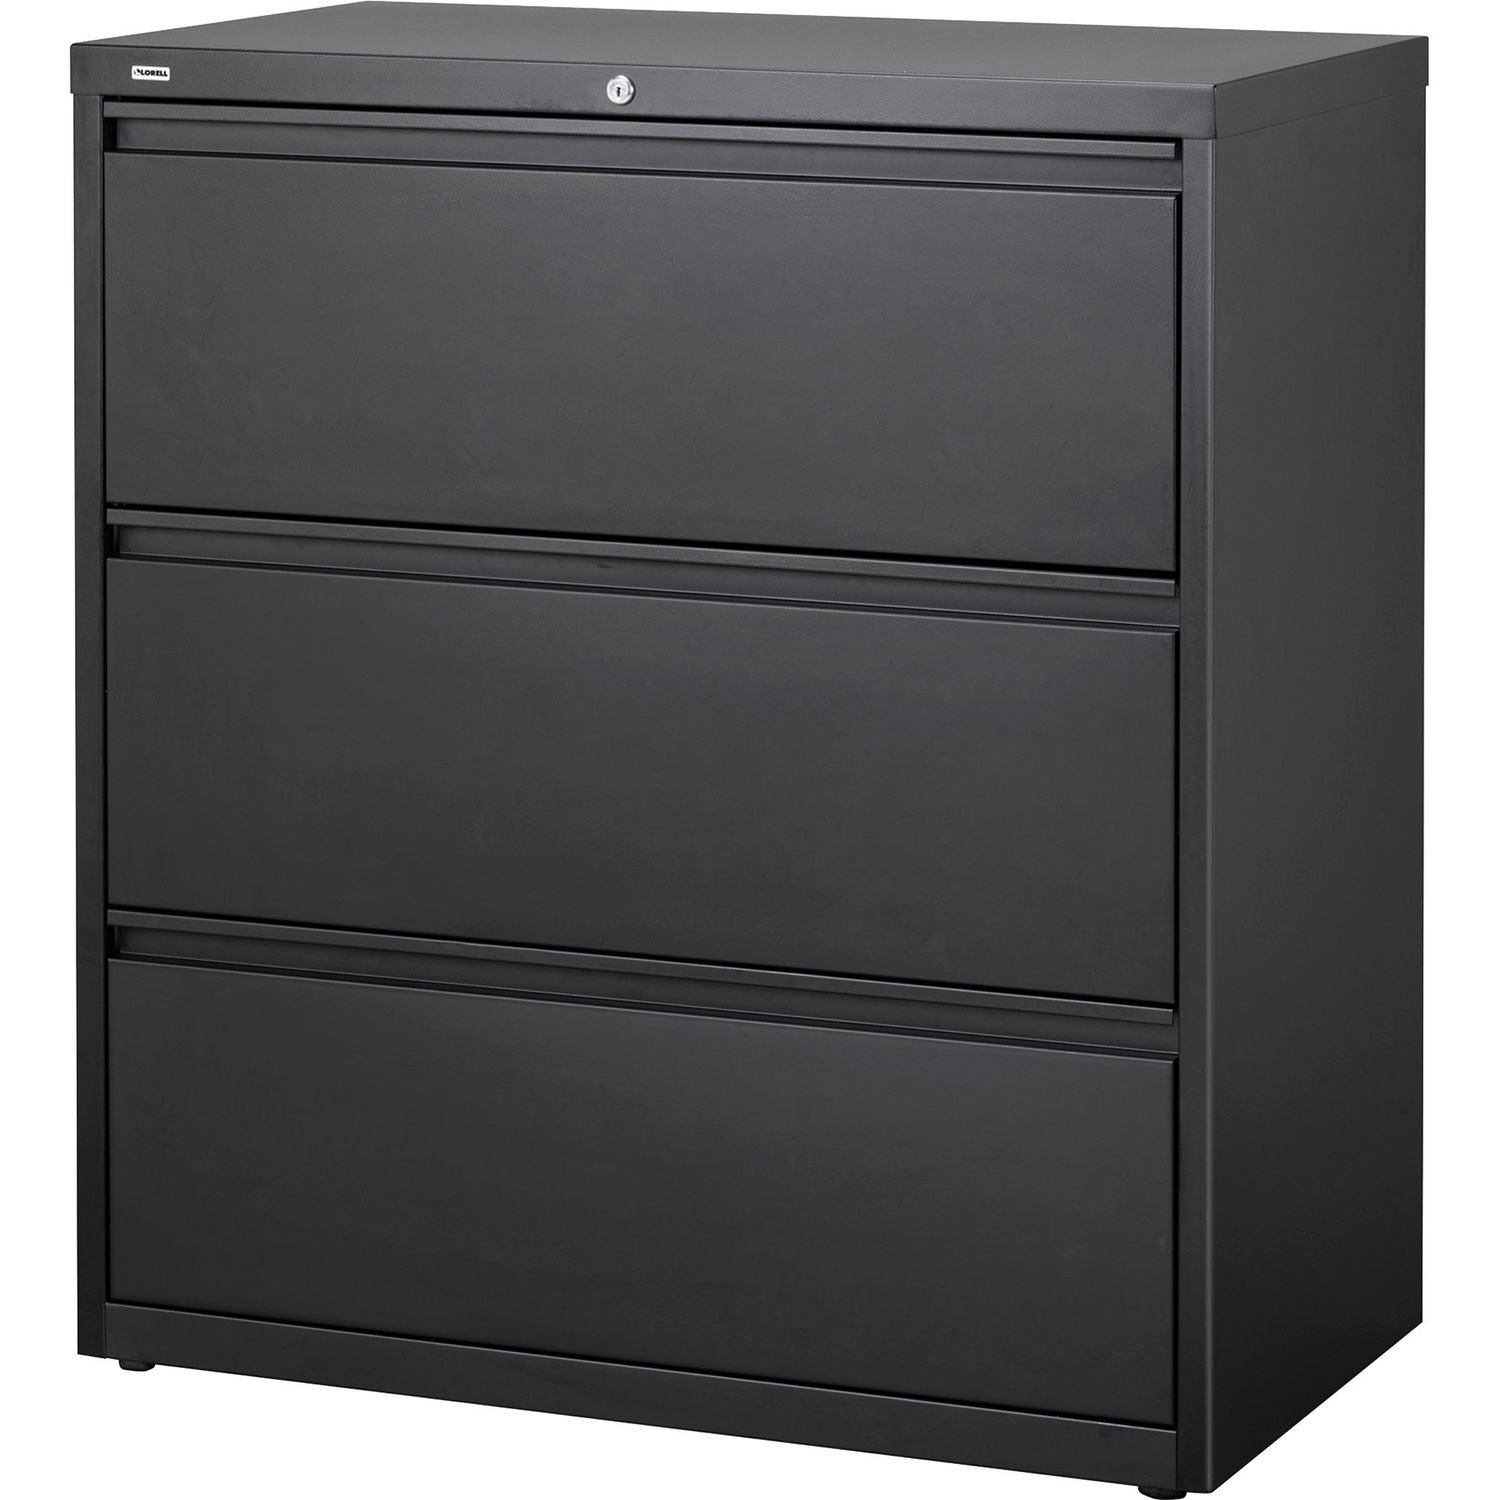 3-Drawer Black Lateral Files 36" x 18.6" x 40.3", 3 x Drawer(s) for File, Letter, Legal, A4, Lateral, Locking Drawer, Magnetic Label Holder, Ball-bearing Suspension, Leveling Glide, Black, Steel